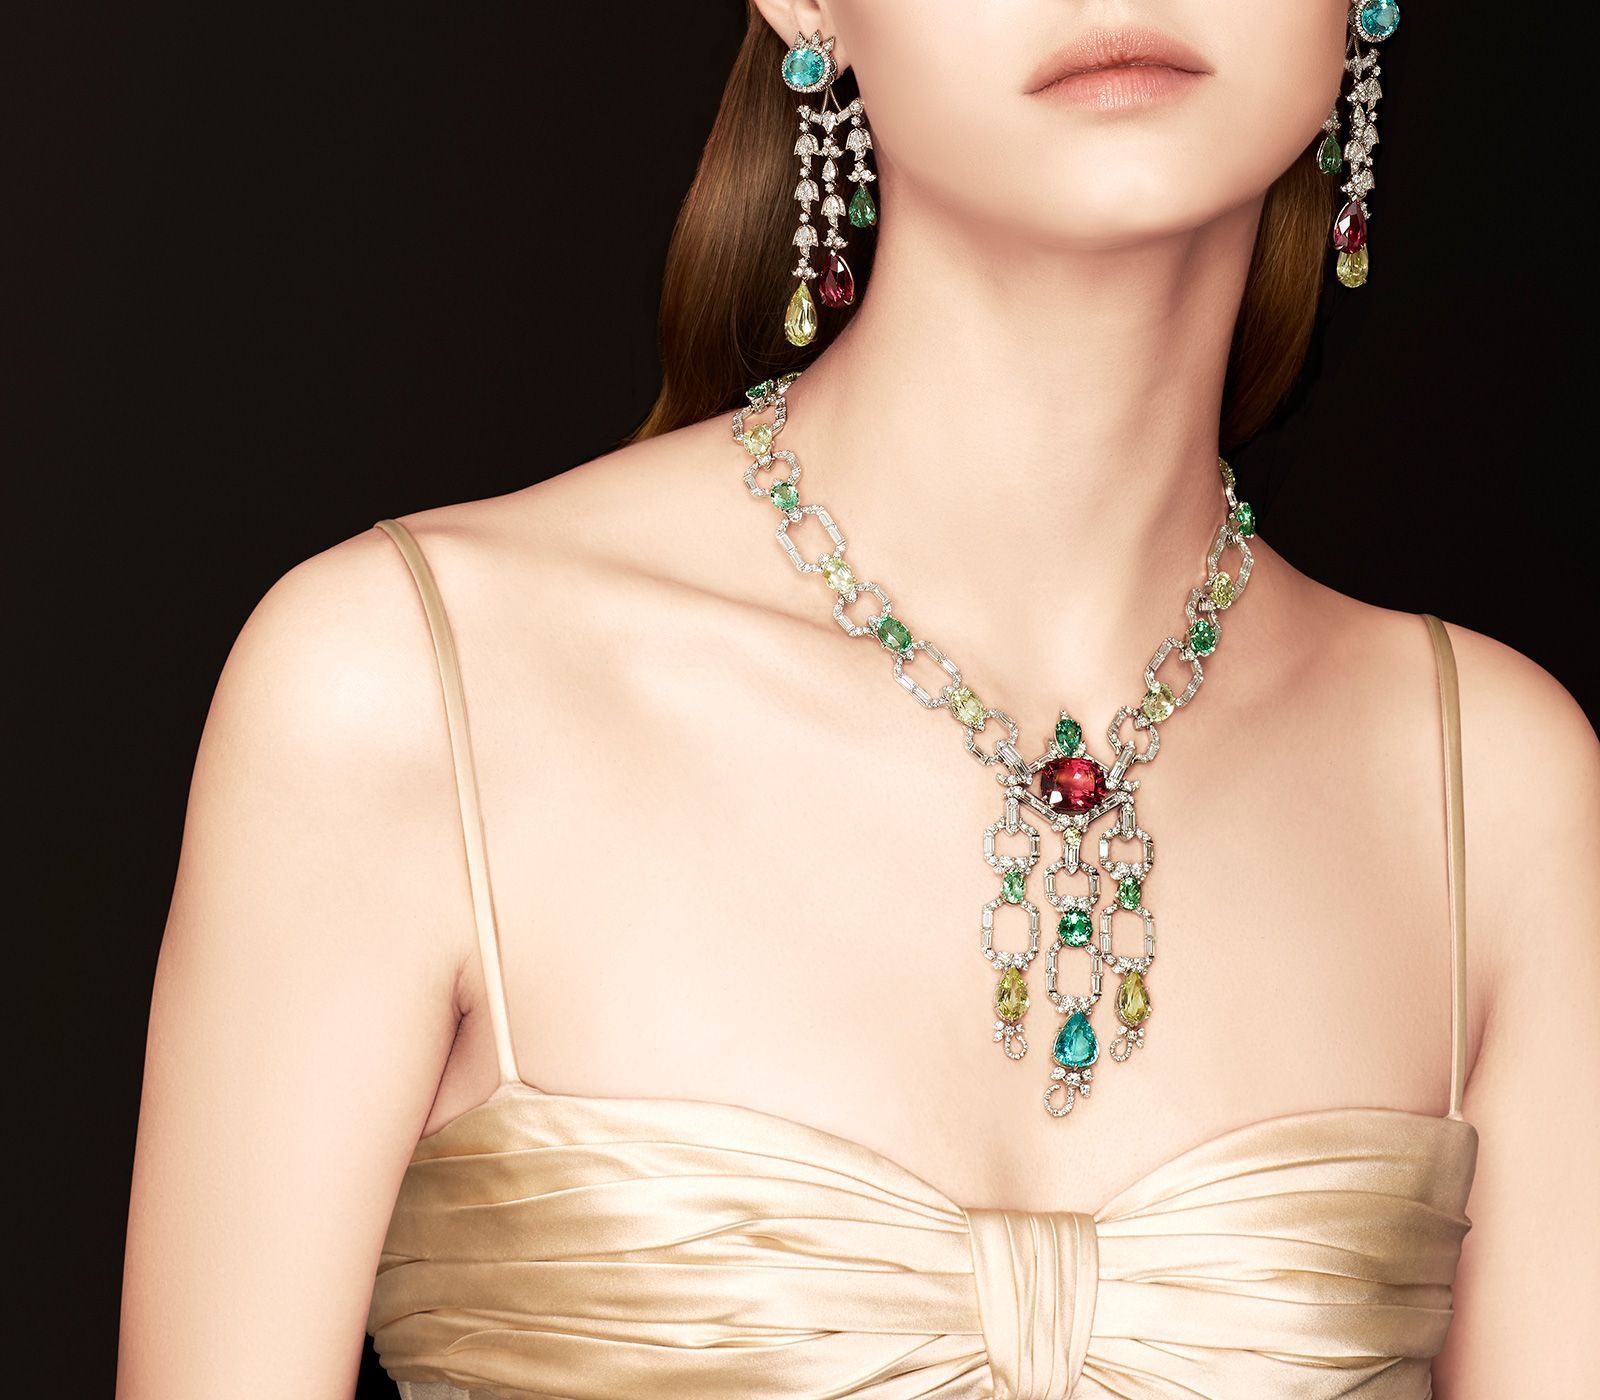 Model wearing Gucci High Jewellery necklace and matching Jacket earrings in white gold, spinel, Paraiba tourmalines, chrysoberyls, spinel and diamonds from the Gucci Allegoria High Jewellery Collection